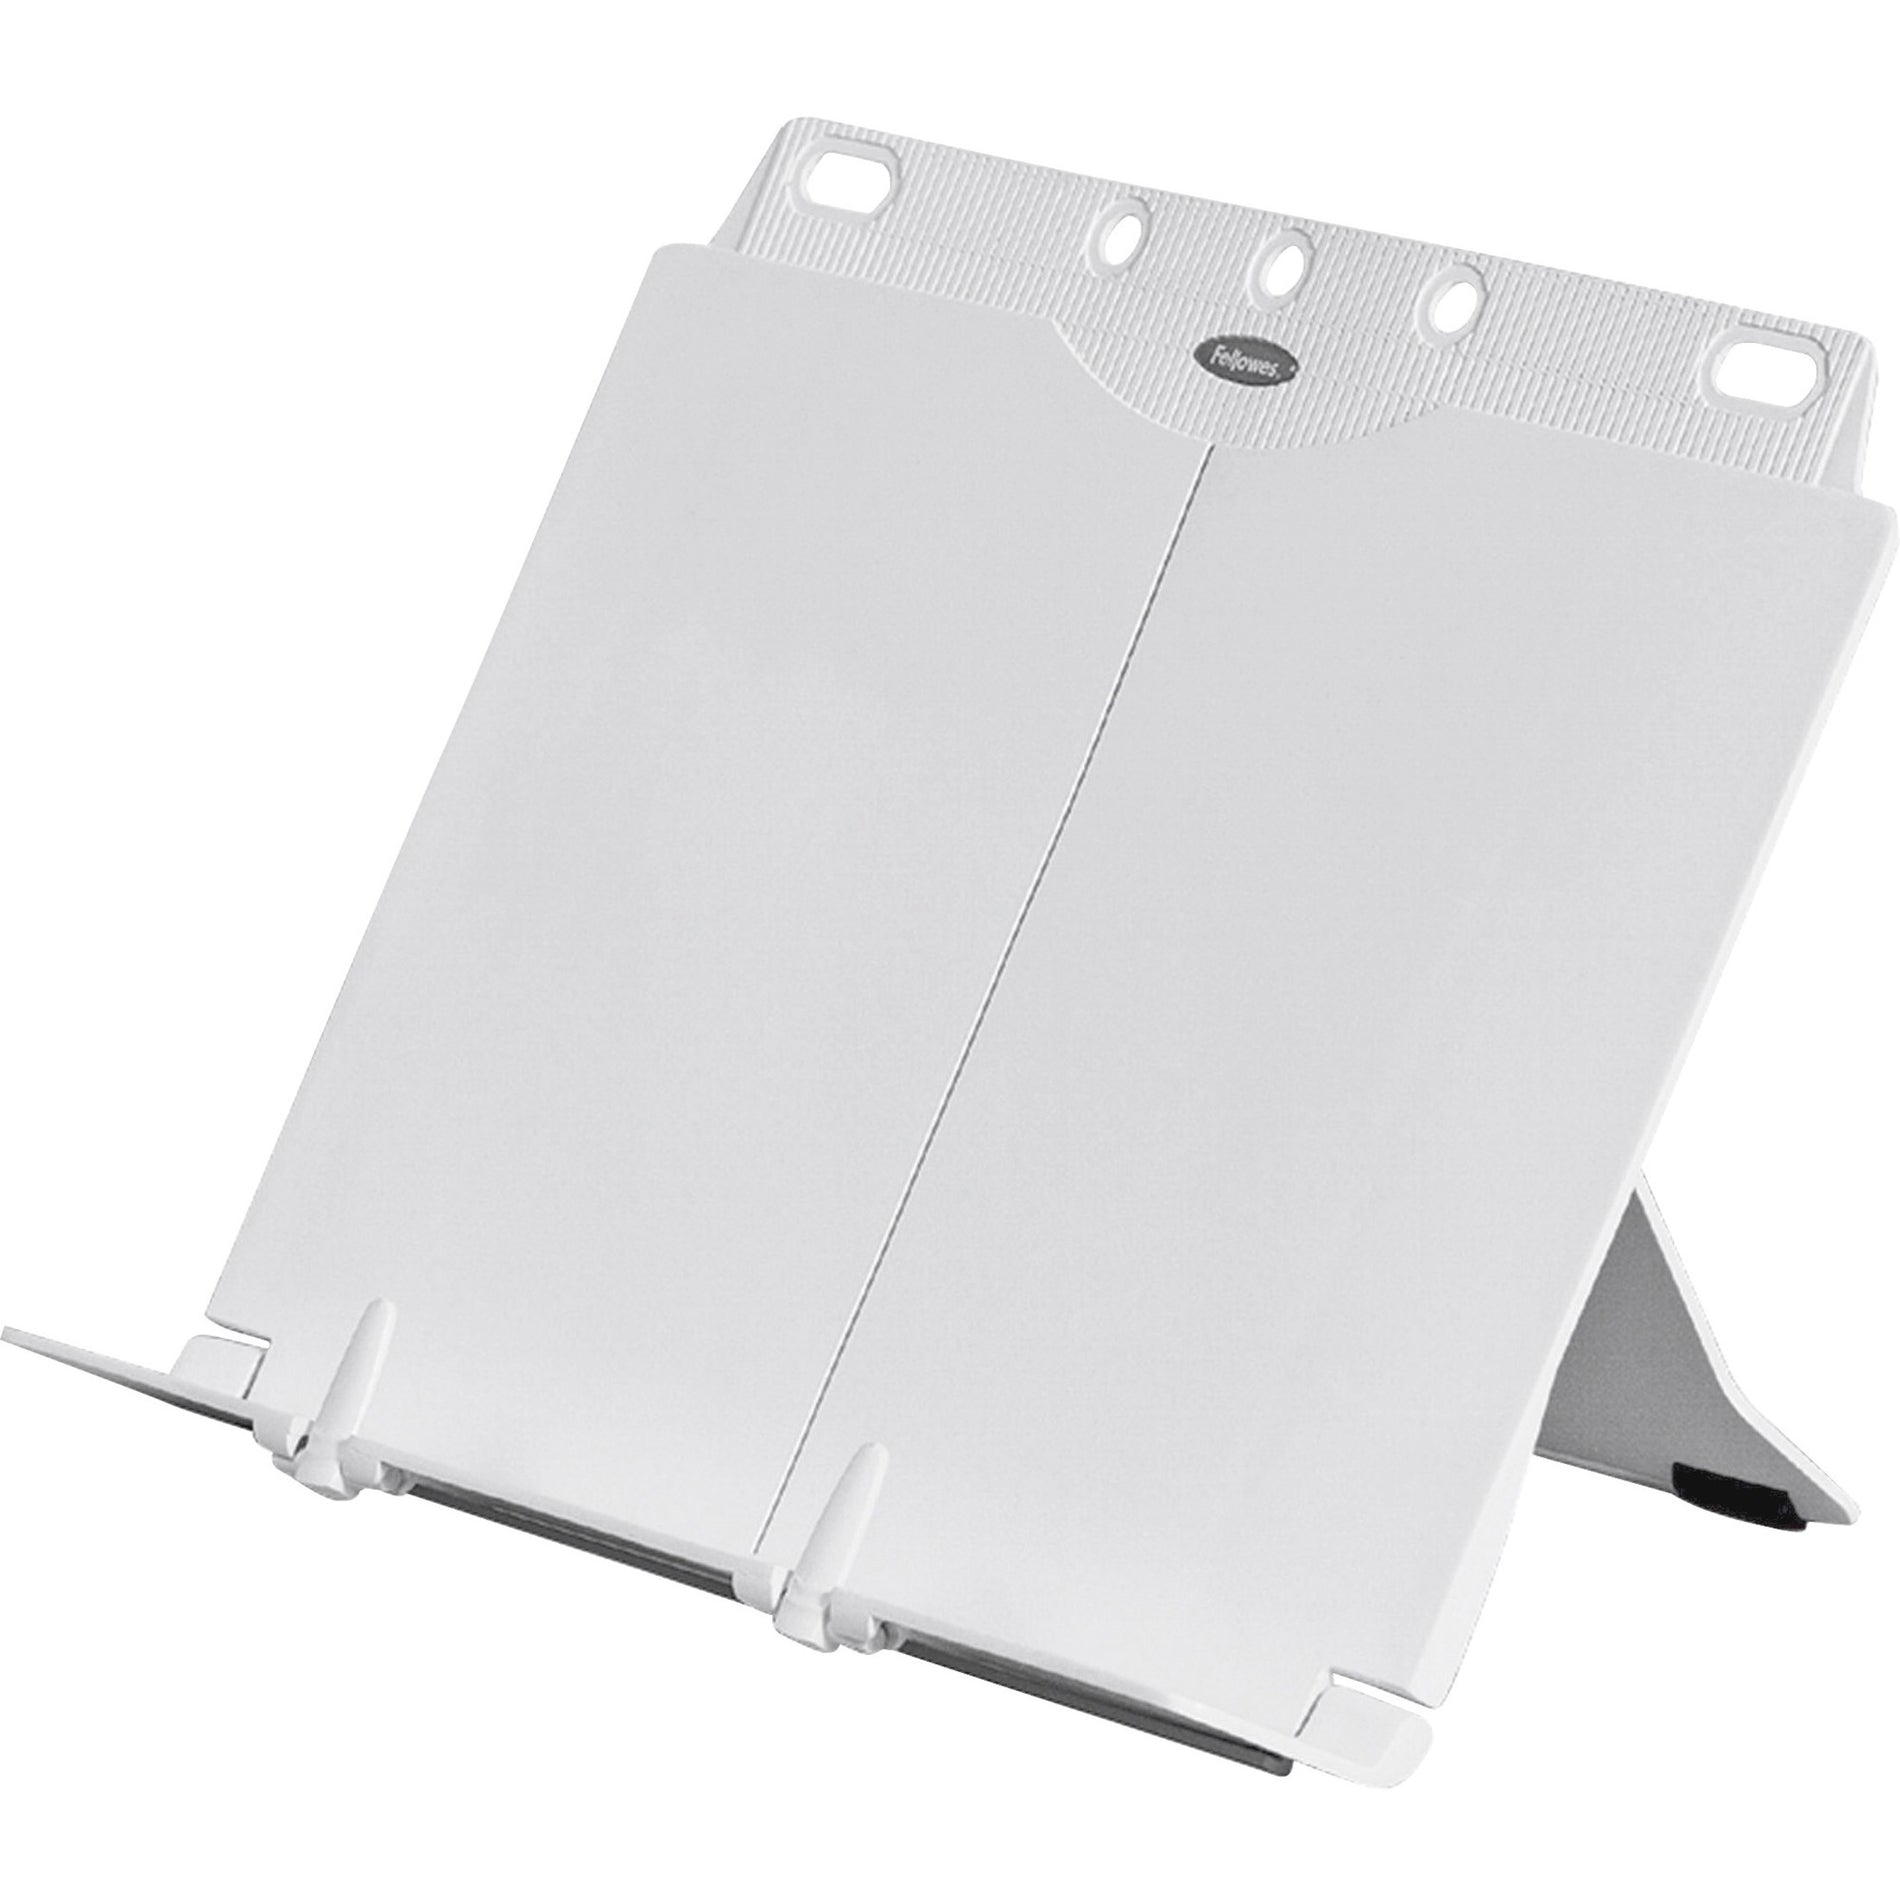 Fellowes 21100 Booklift Copyholders, Platinum - Convenient Copy Holder for Books and Documents